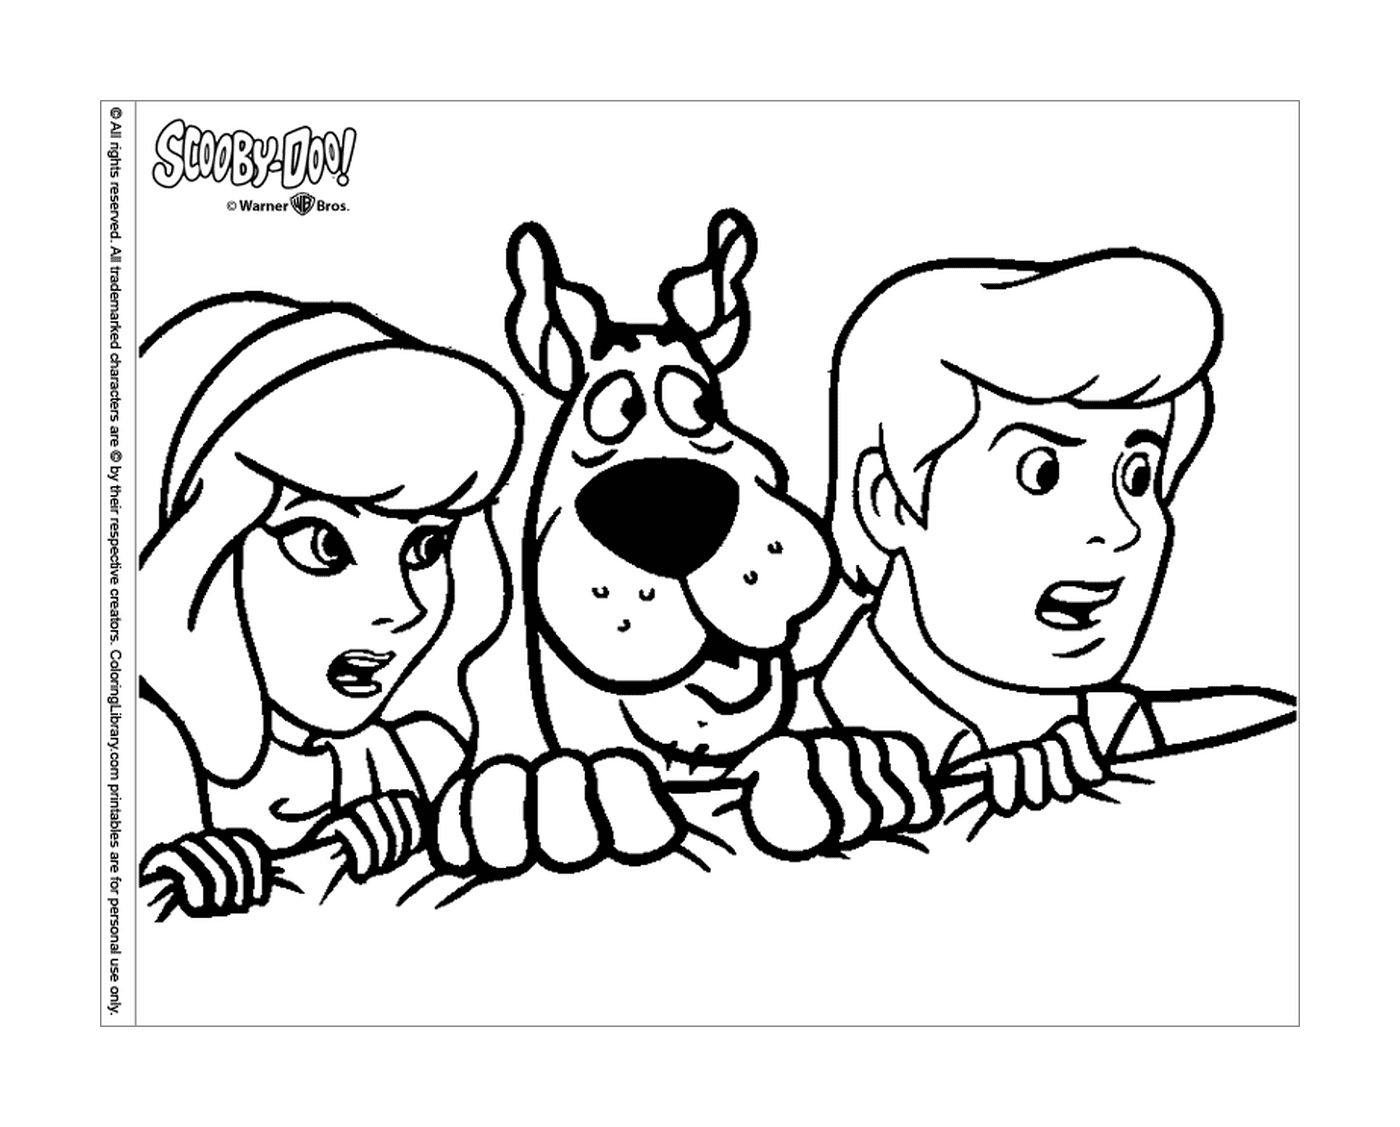  Scooby-Doo's band 